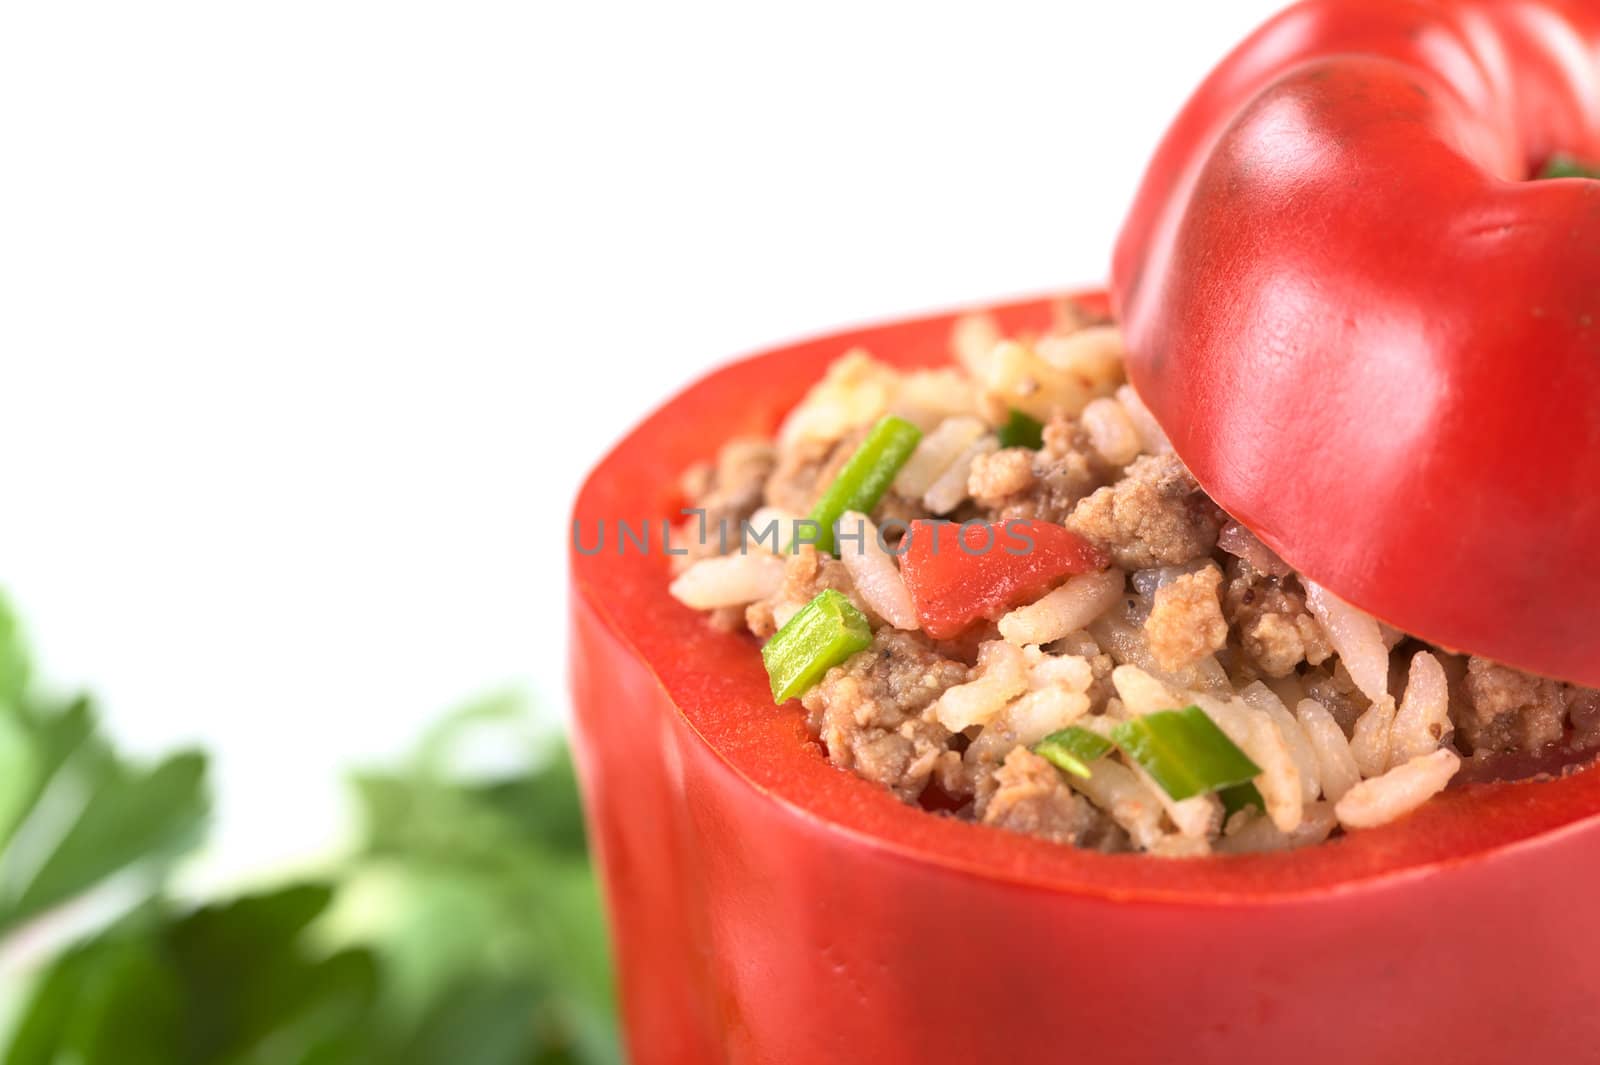 Unbaked stuffed red bell pepper filled with ground meat, onion, rice, tomato and green onion (Selective Focus, Focus on the tomato piece and the stuffing around it in the pepper) 